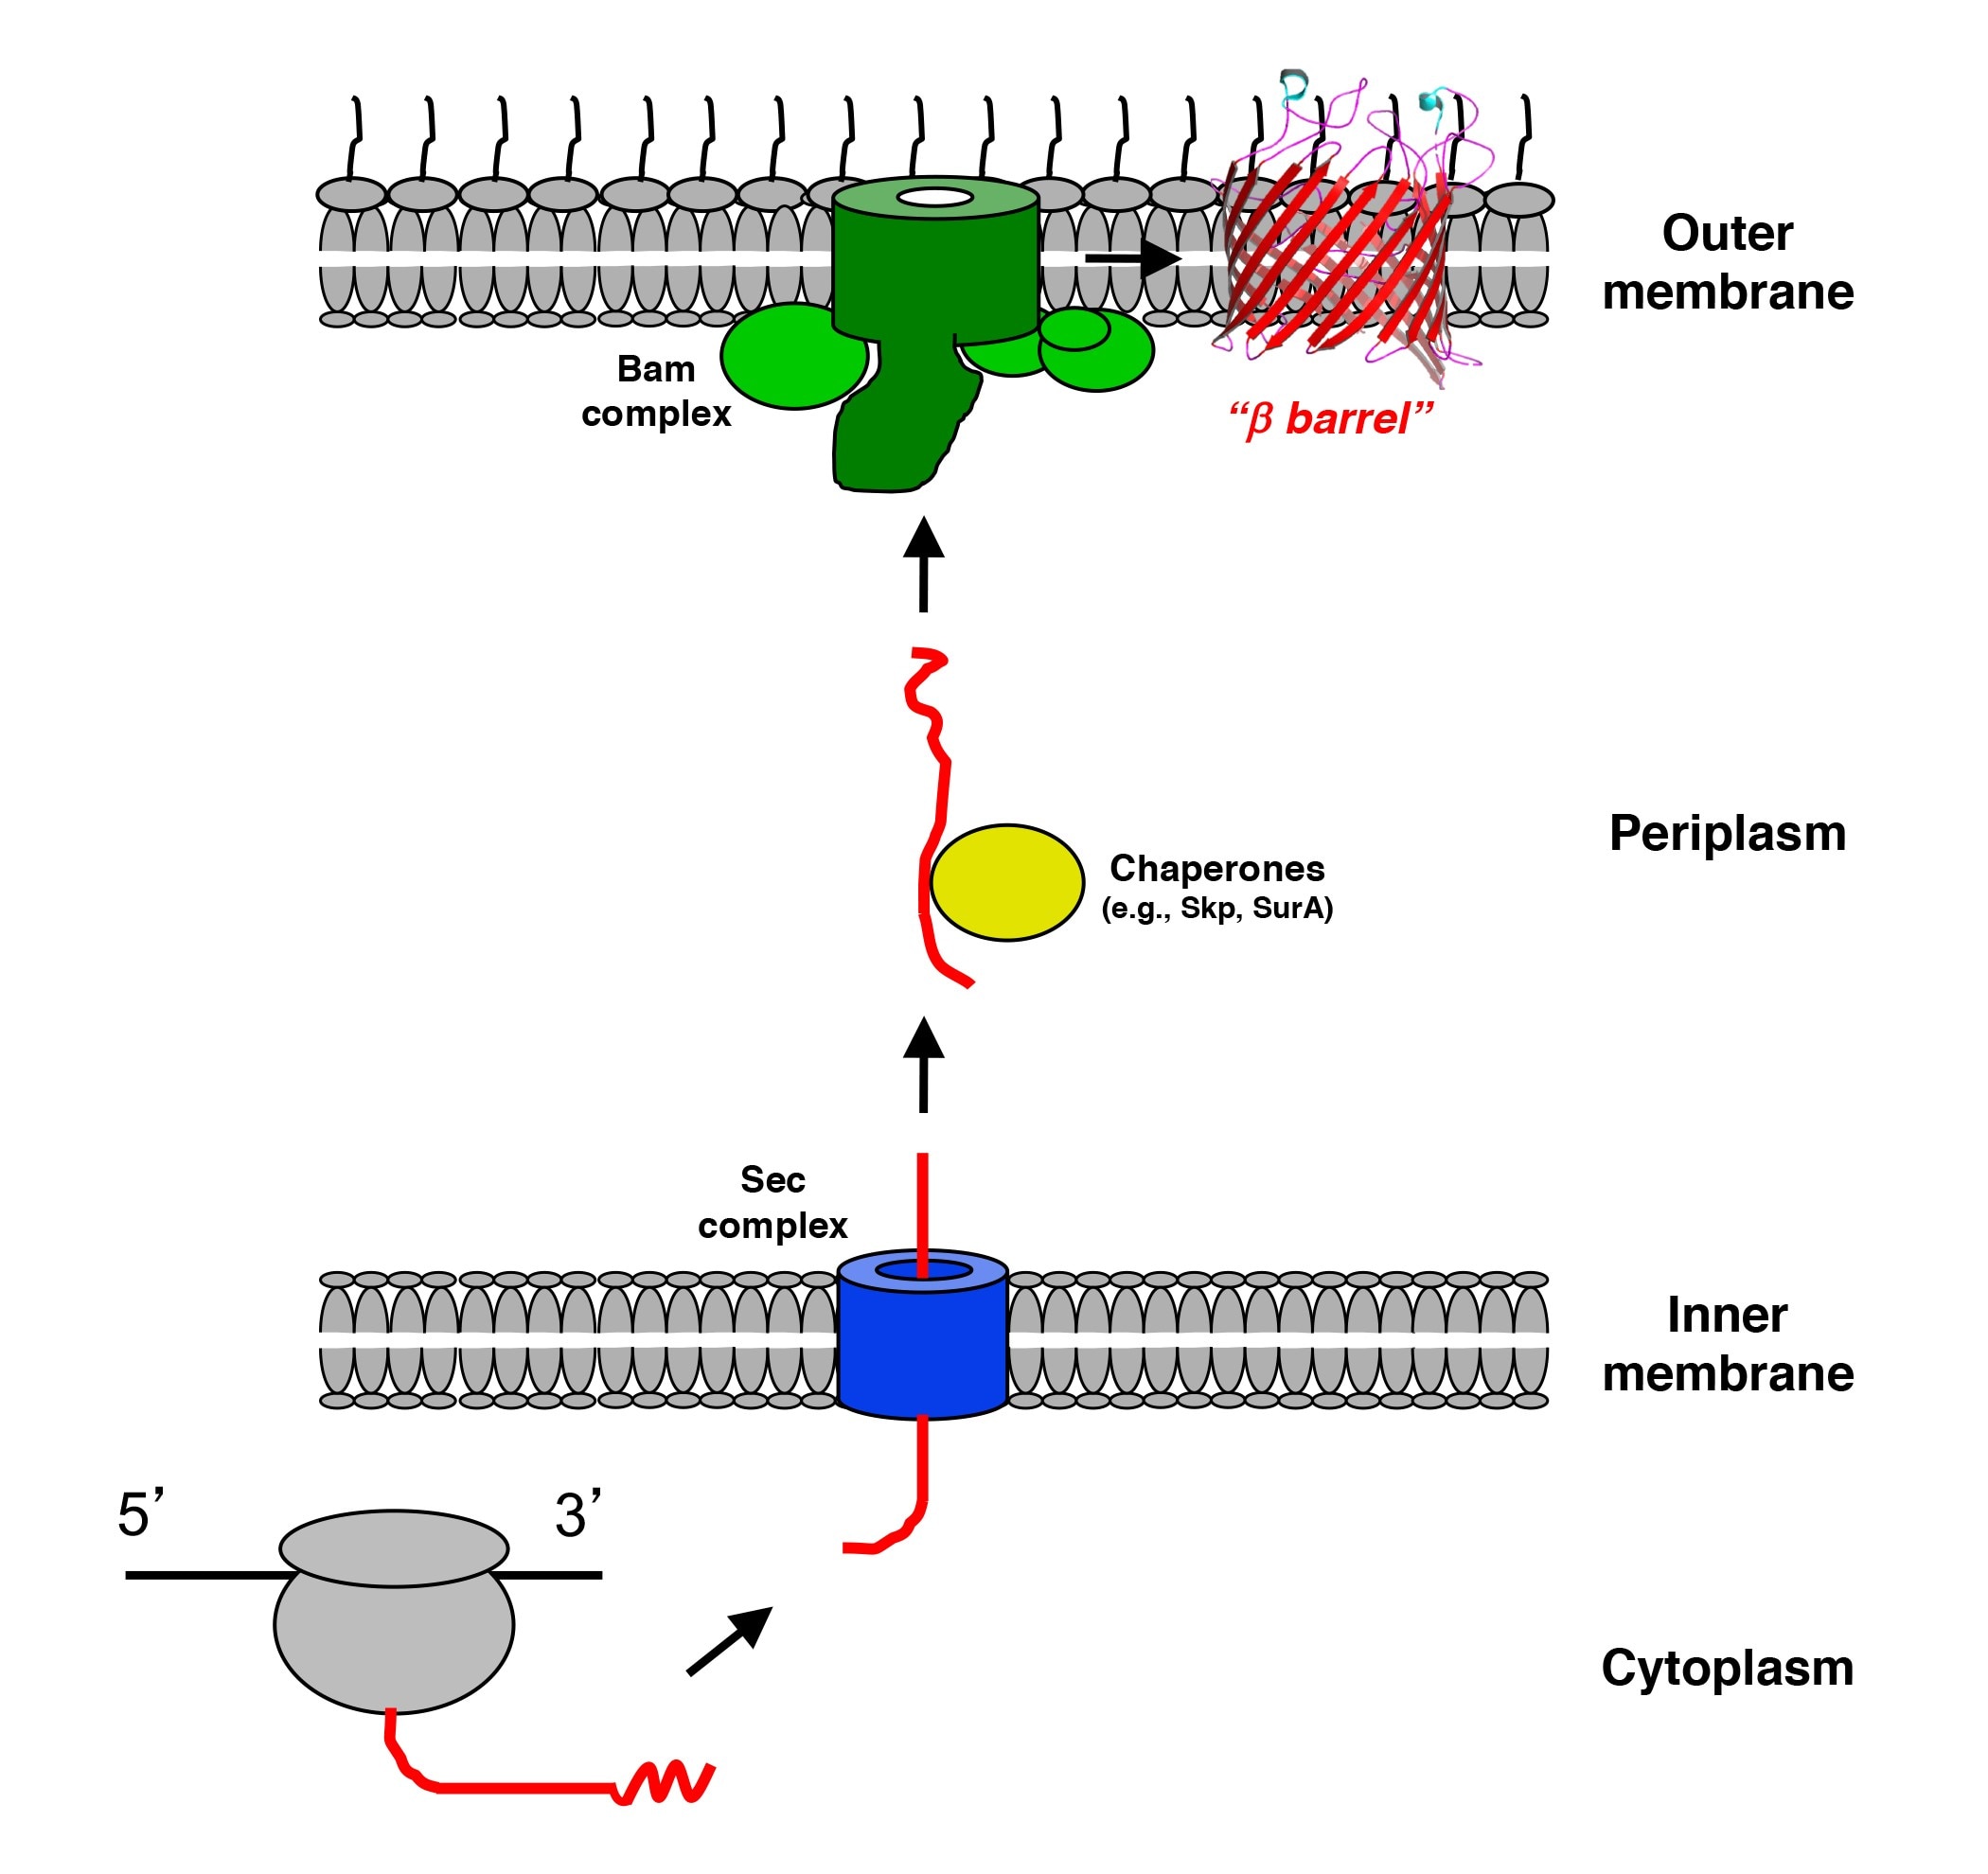 A graphic which depicts outer membrane protein (O M P) biogenesis in Gram-negative bacteria